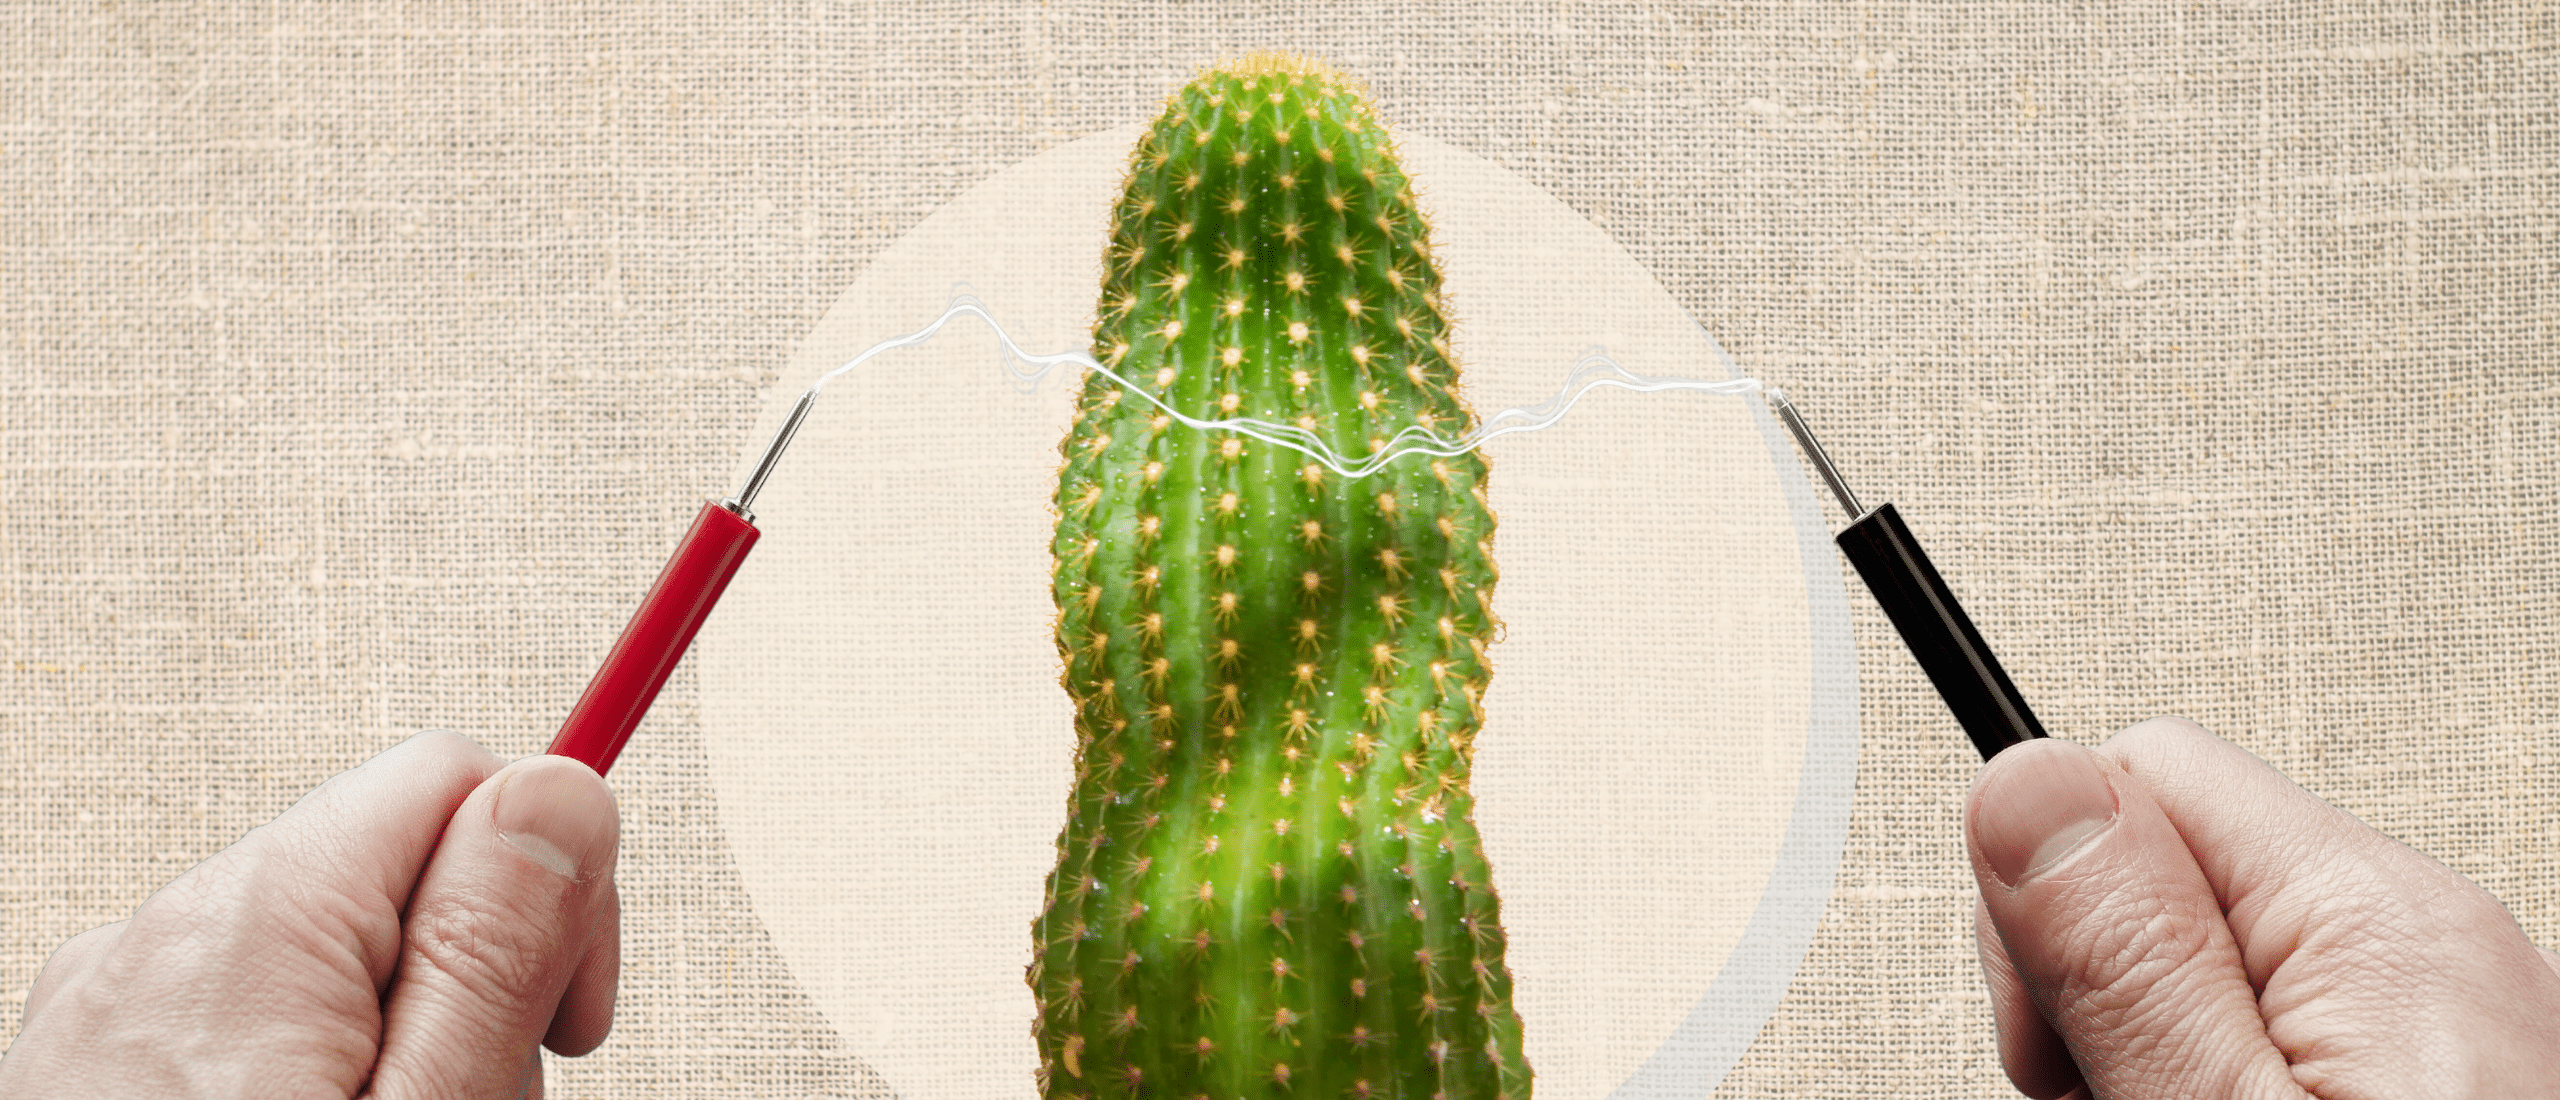 two hands send electrical signals across a slim cactus